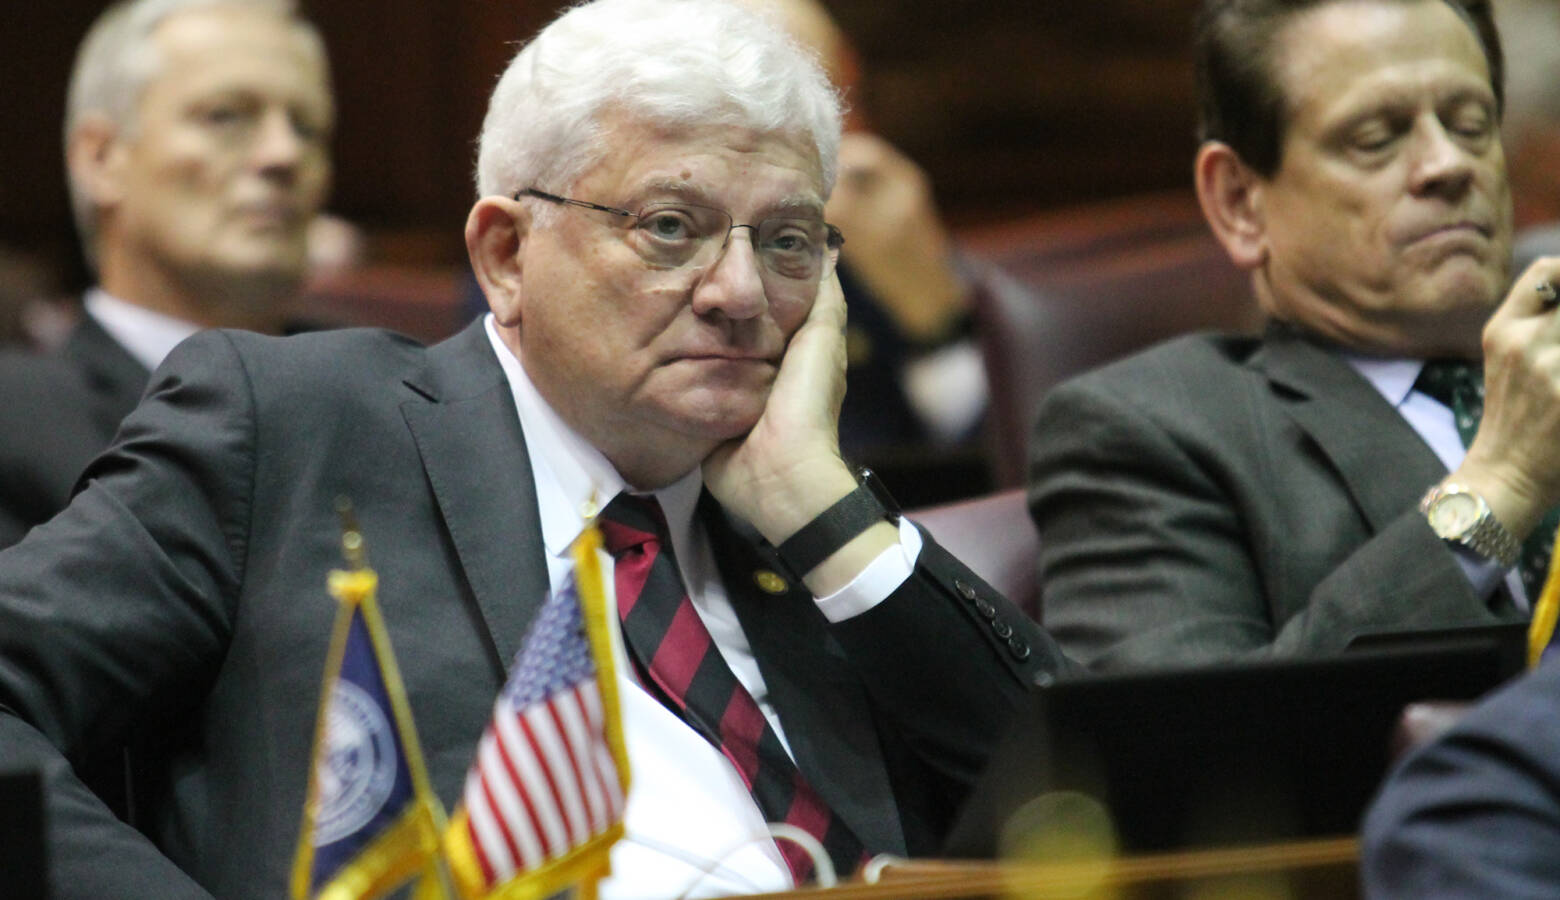 Rep. Ed Soliday (R-Valparaiso) authored the bill one year after proposing legislation that would have put renewable energy projects on hold. (Lauren Chapman/IPB News)